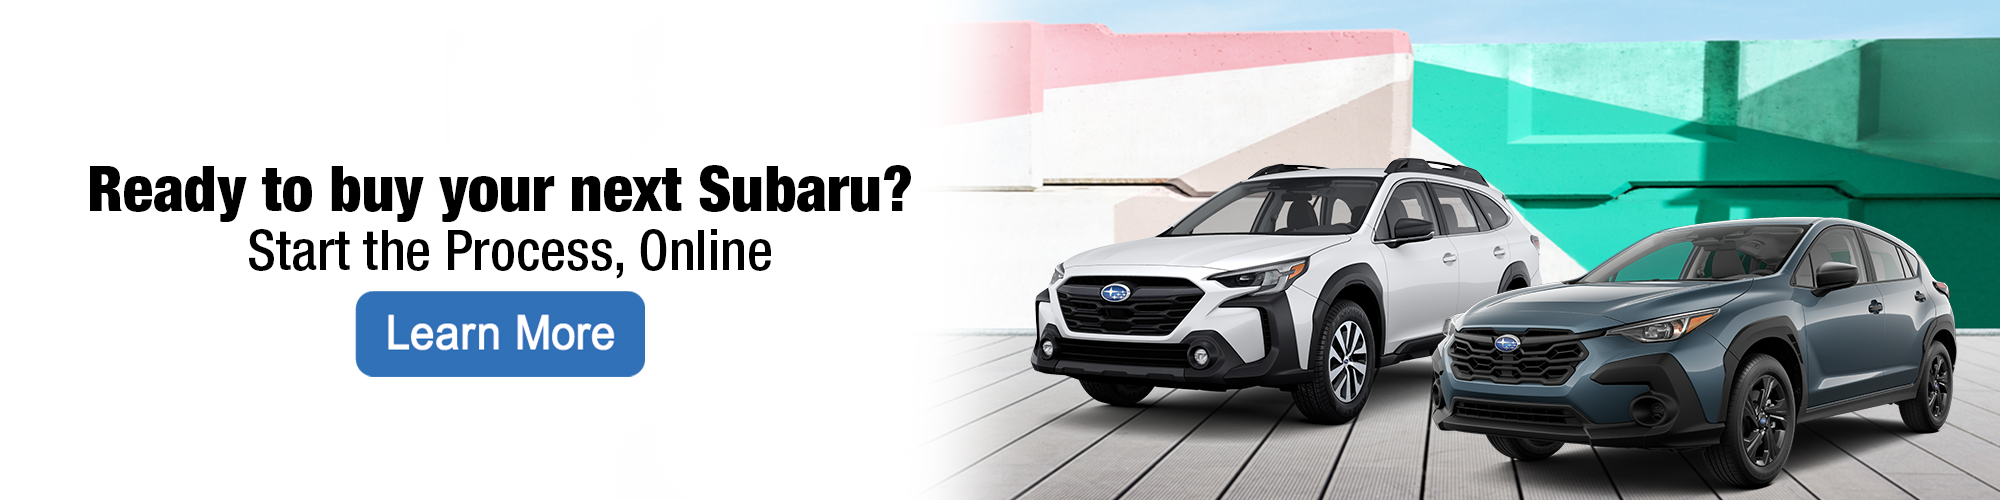 Ready to buy your next Subaru? Start the process online.